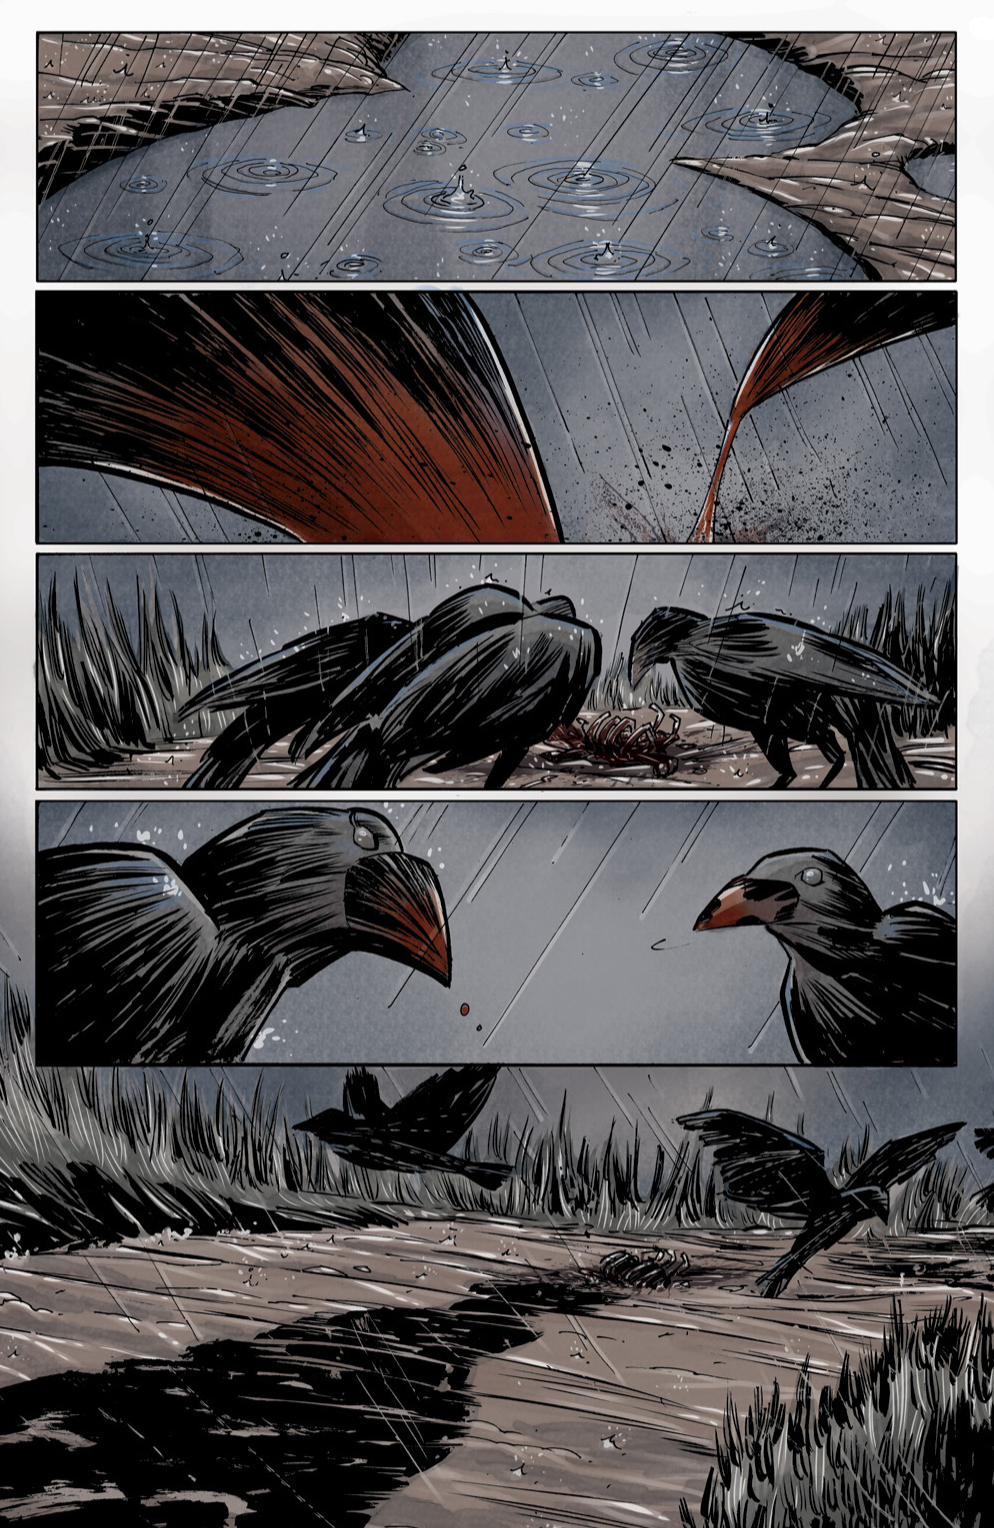 THE LAST SIEGE #1 PG 01-26 PREVIEW-3.jpg